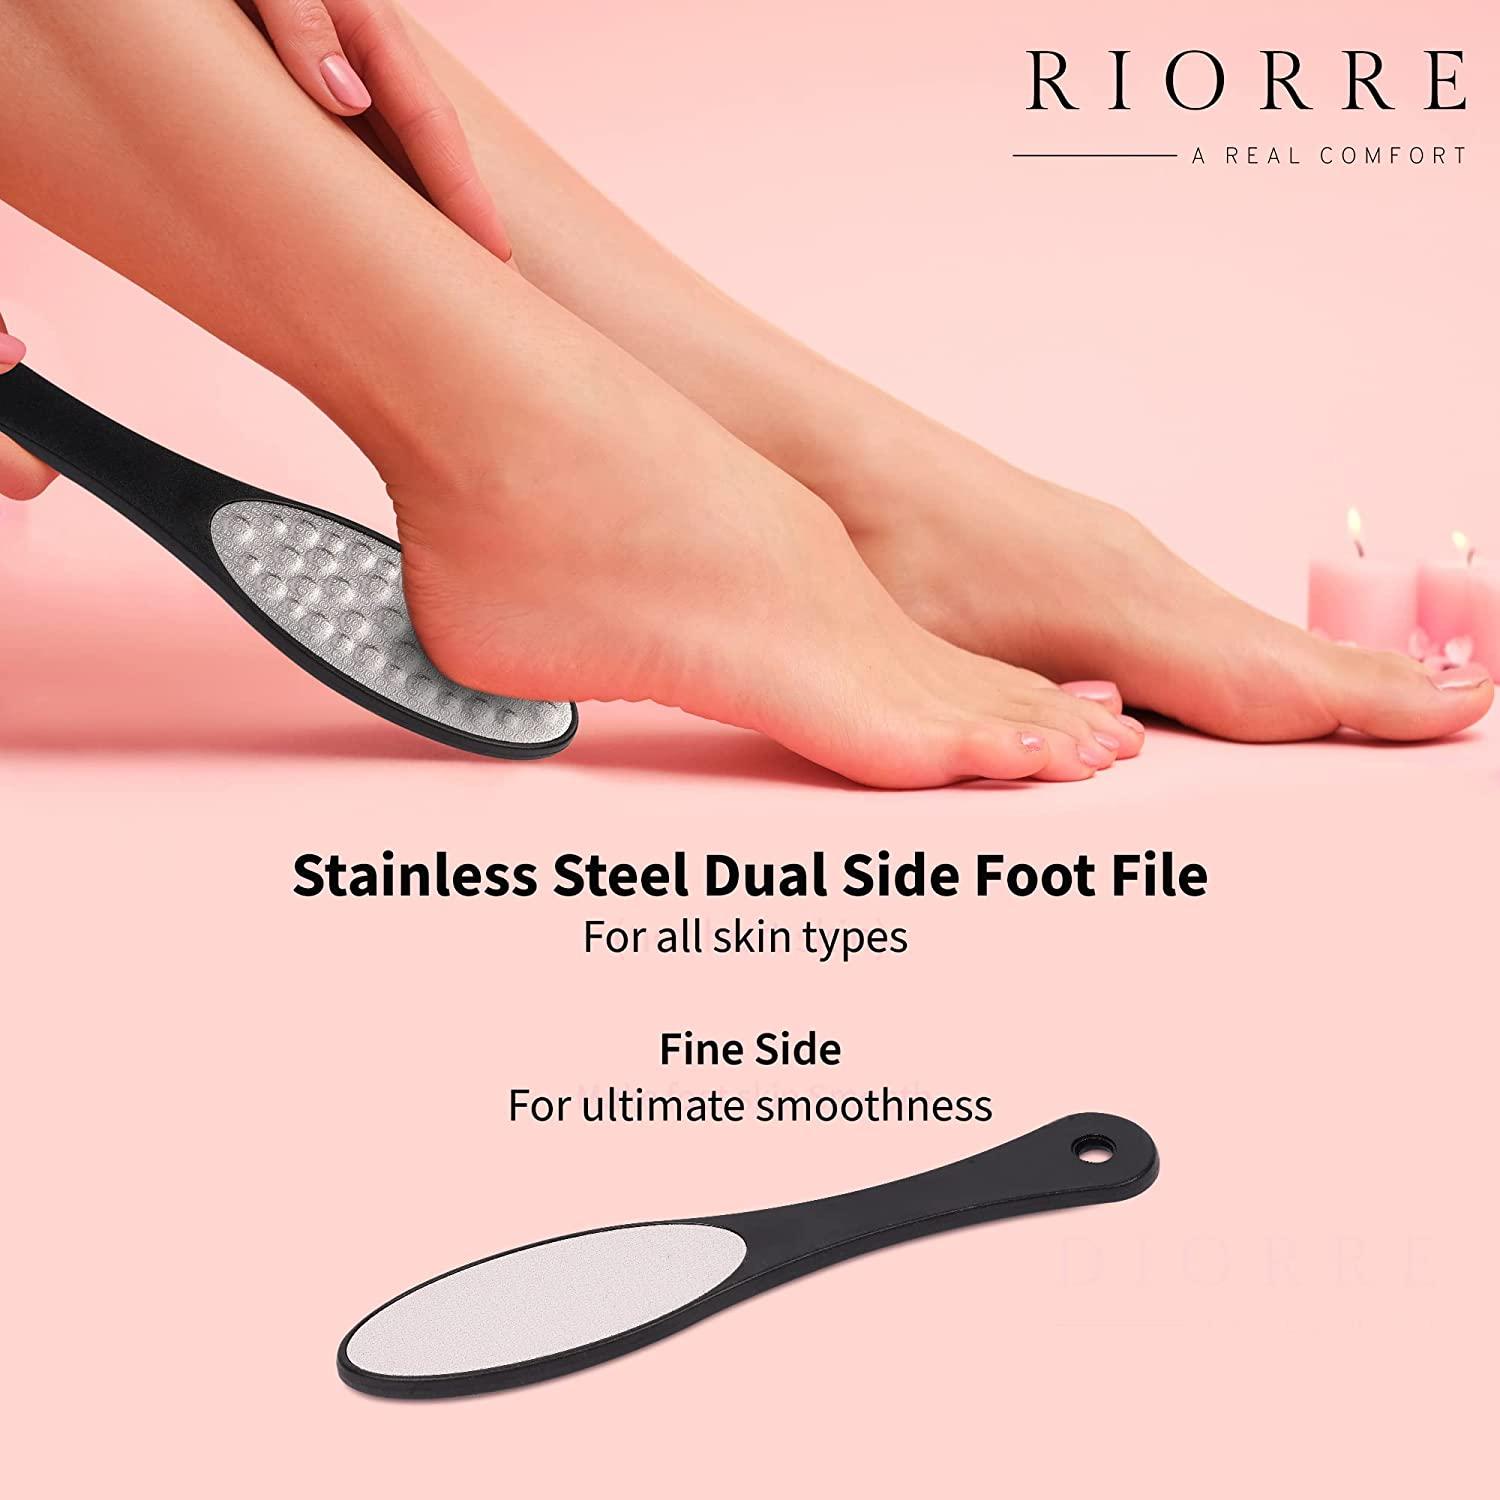 Riorre Professional Foot Scrubber for Hard Skin - Premium 3 in 1 Pedicure Foot File, Foot Scraper & Callus Remover for Feet Leaving Soft & Smooth Hee